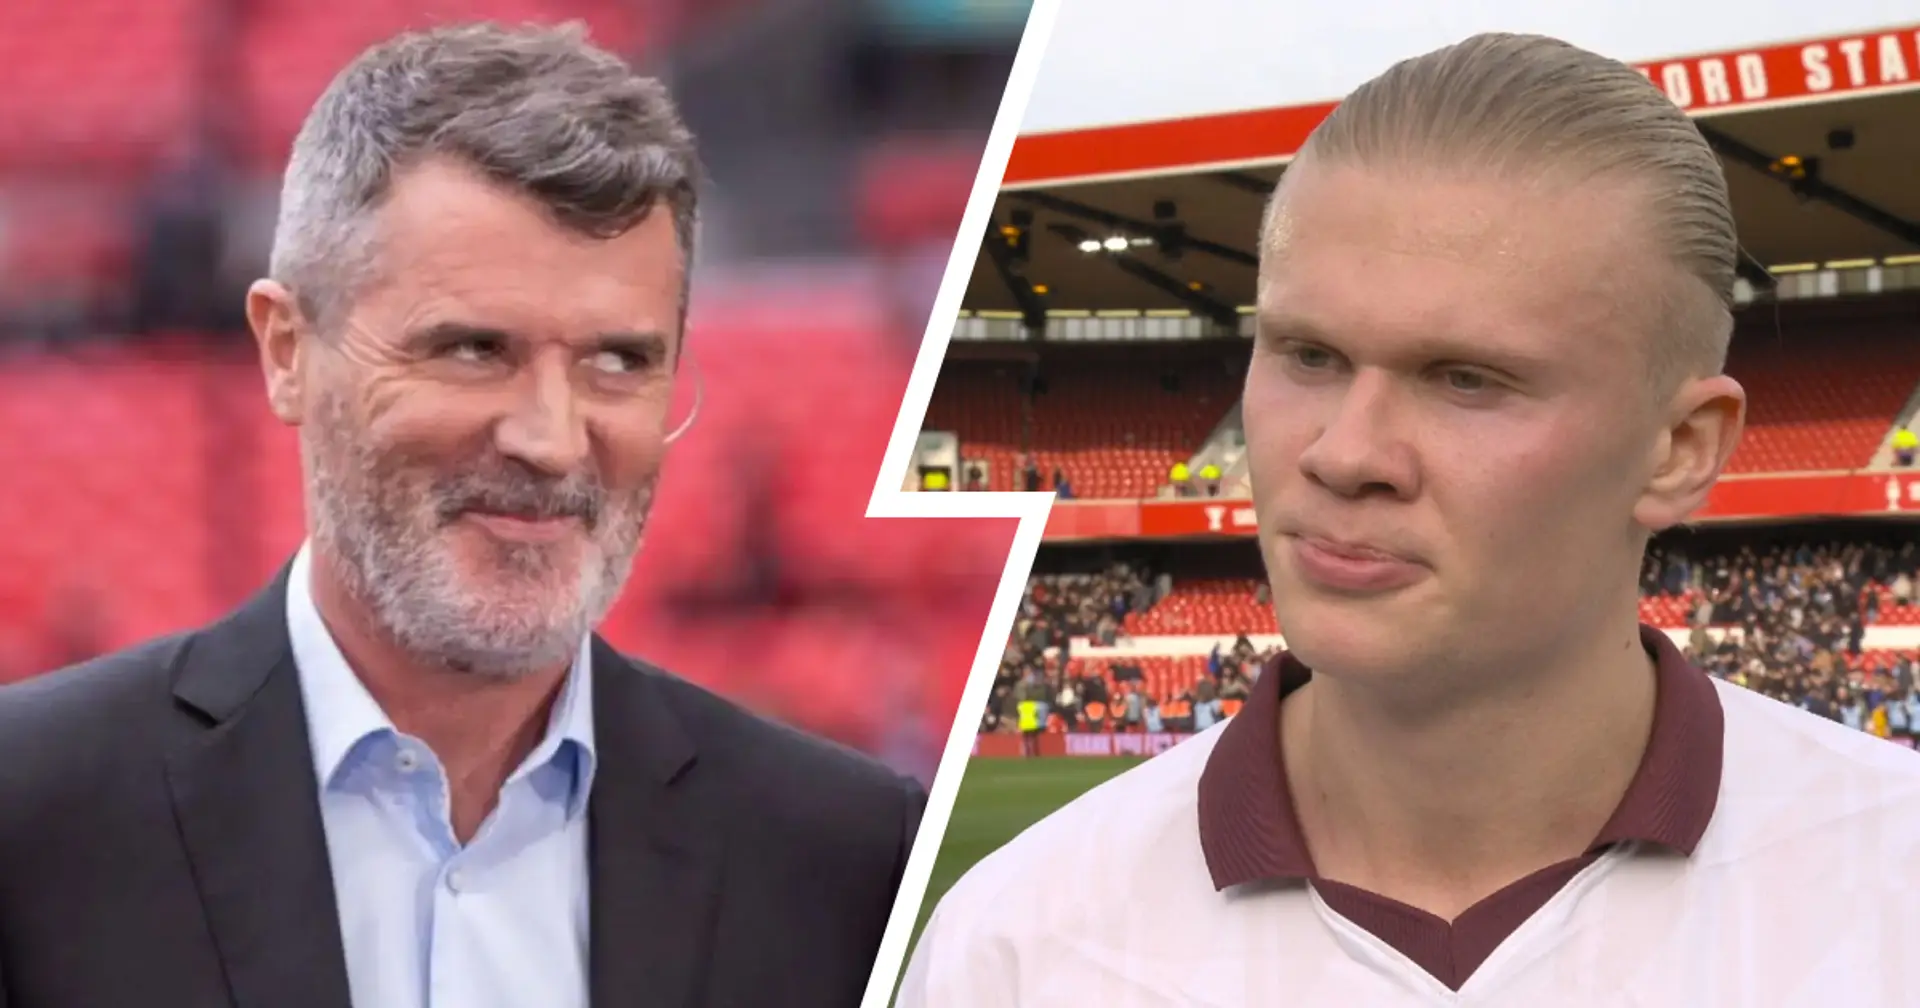 'I don’t really care about that man': Haaland finally responds to Roy Keane criticism